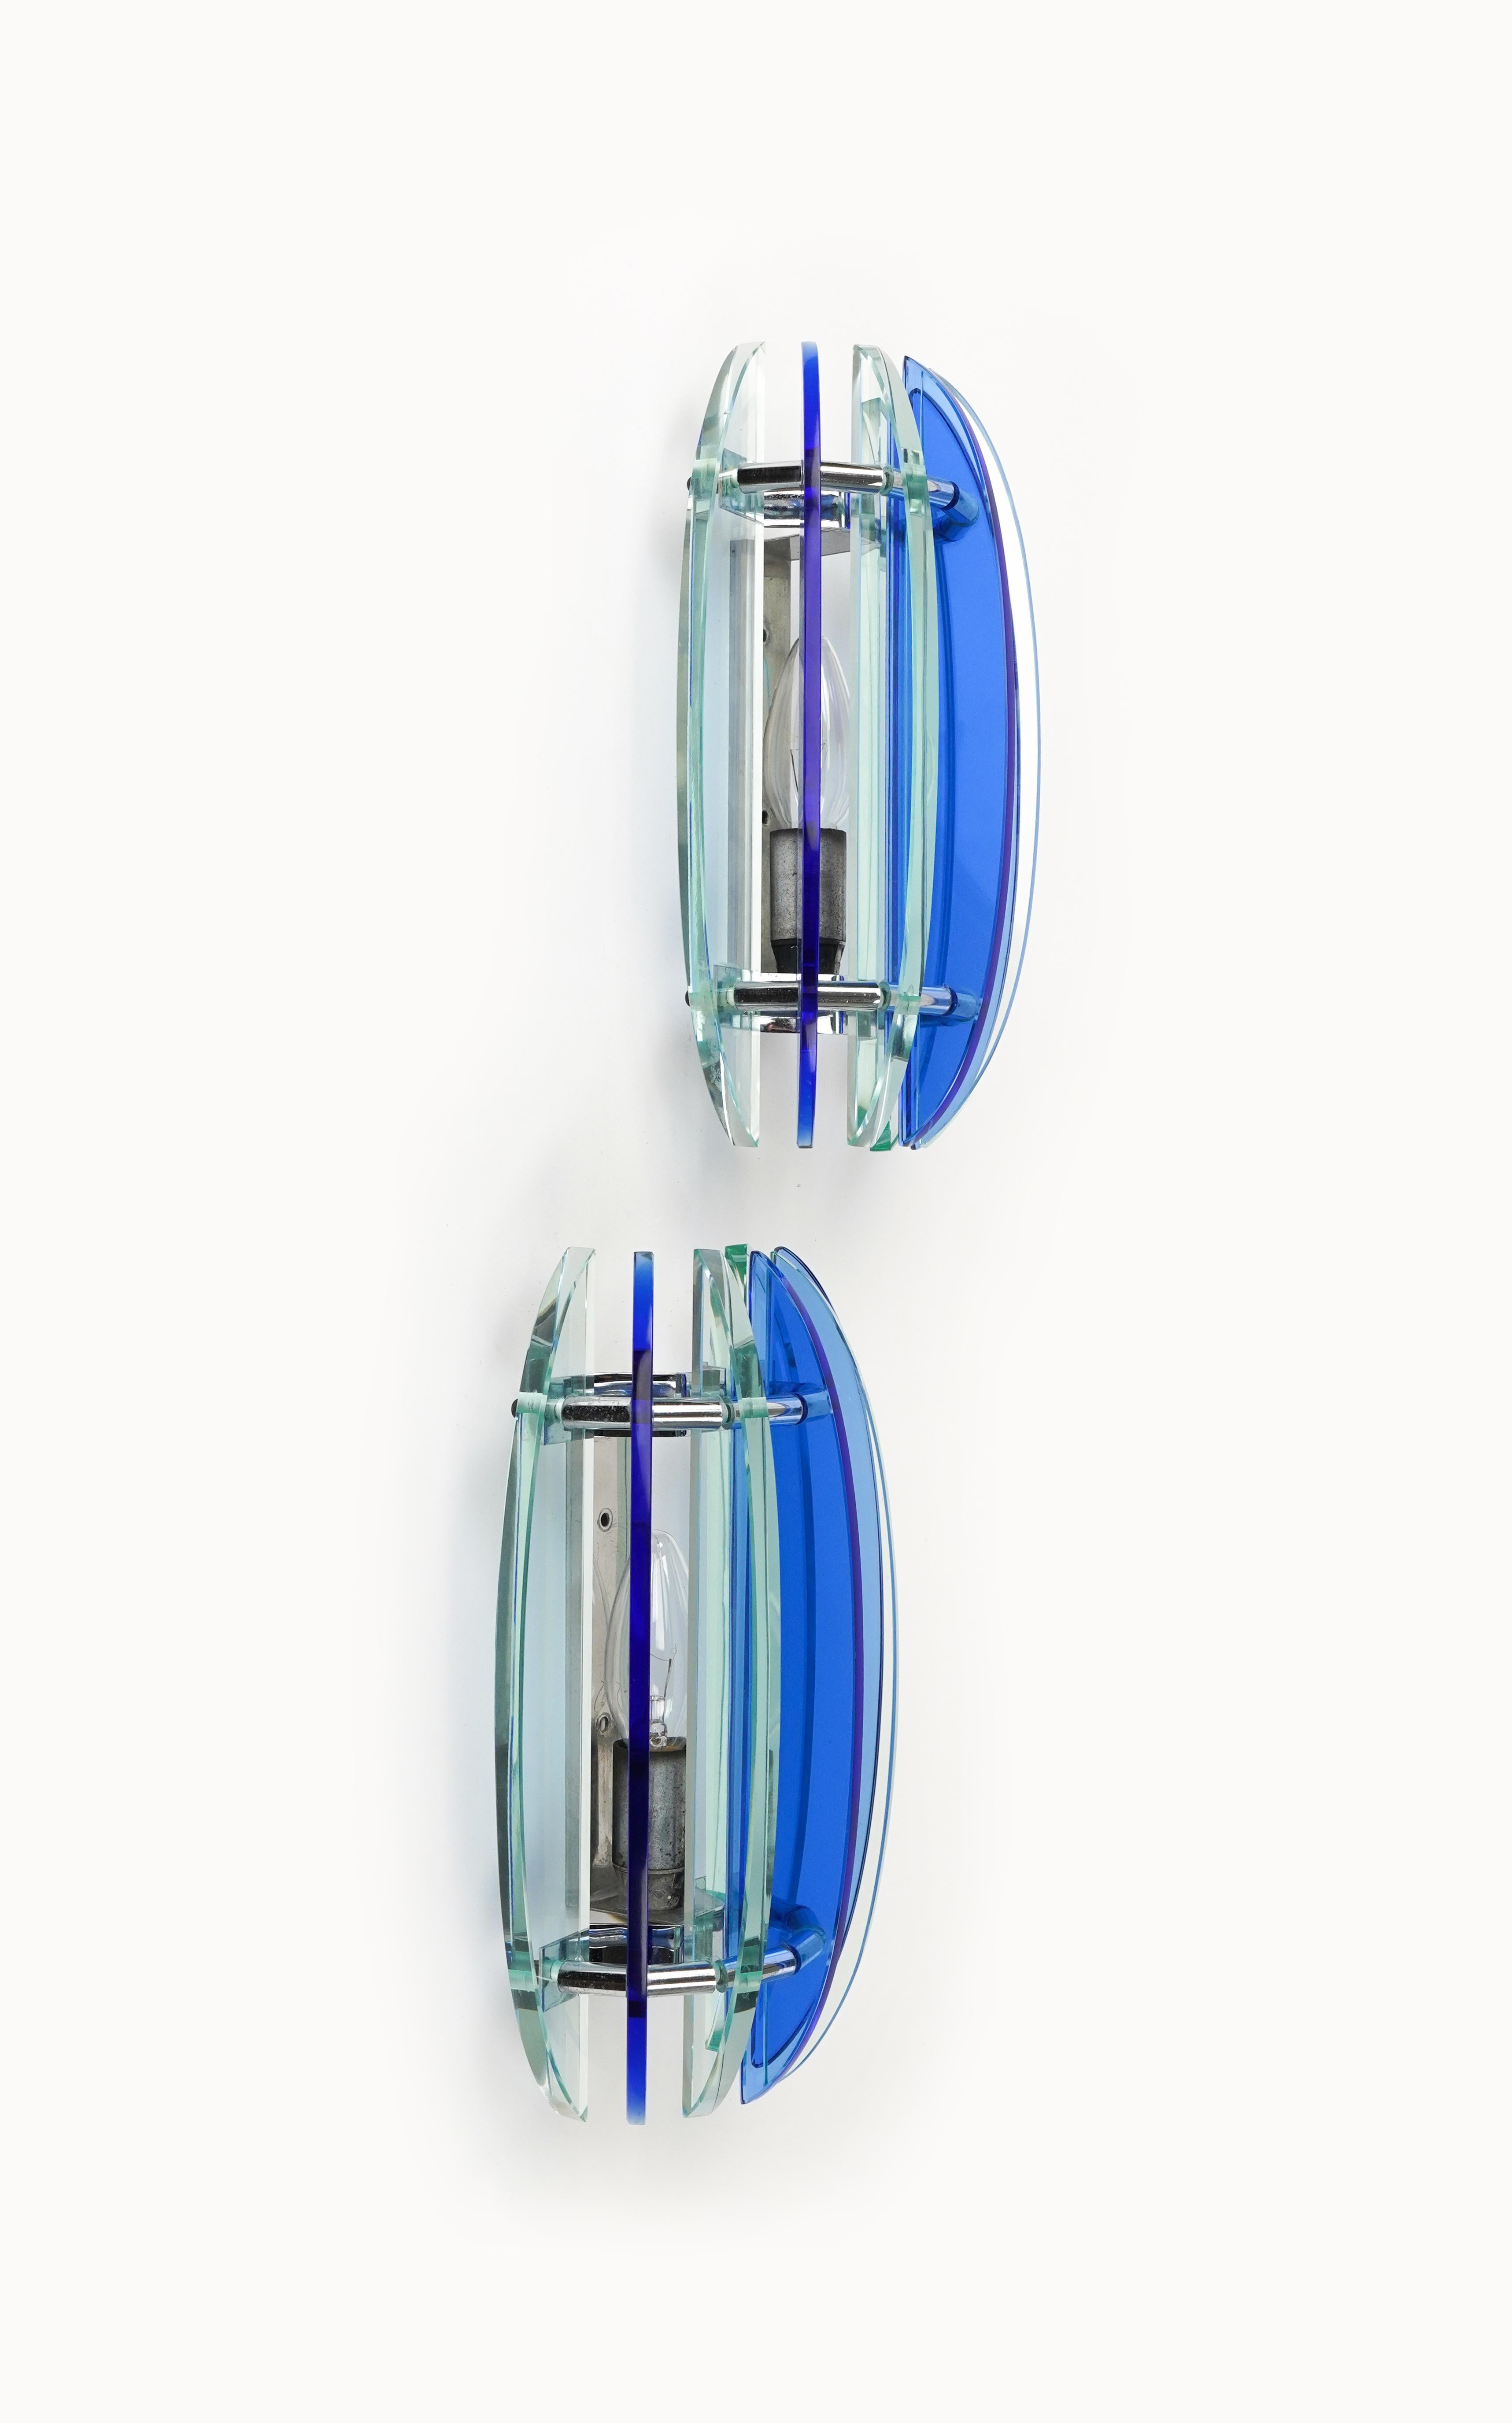 Metal Midcentury Pair of Wall Sconces in Colored Glass & Chrome by Veca, Italy, 1970s For Sale